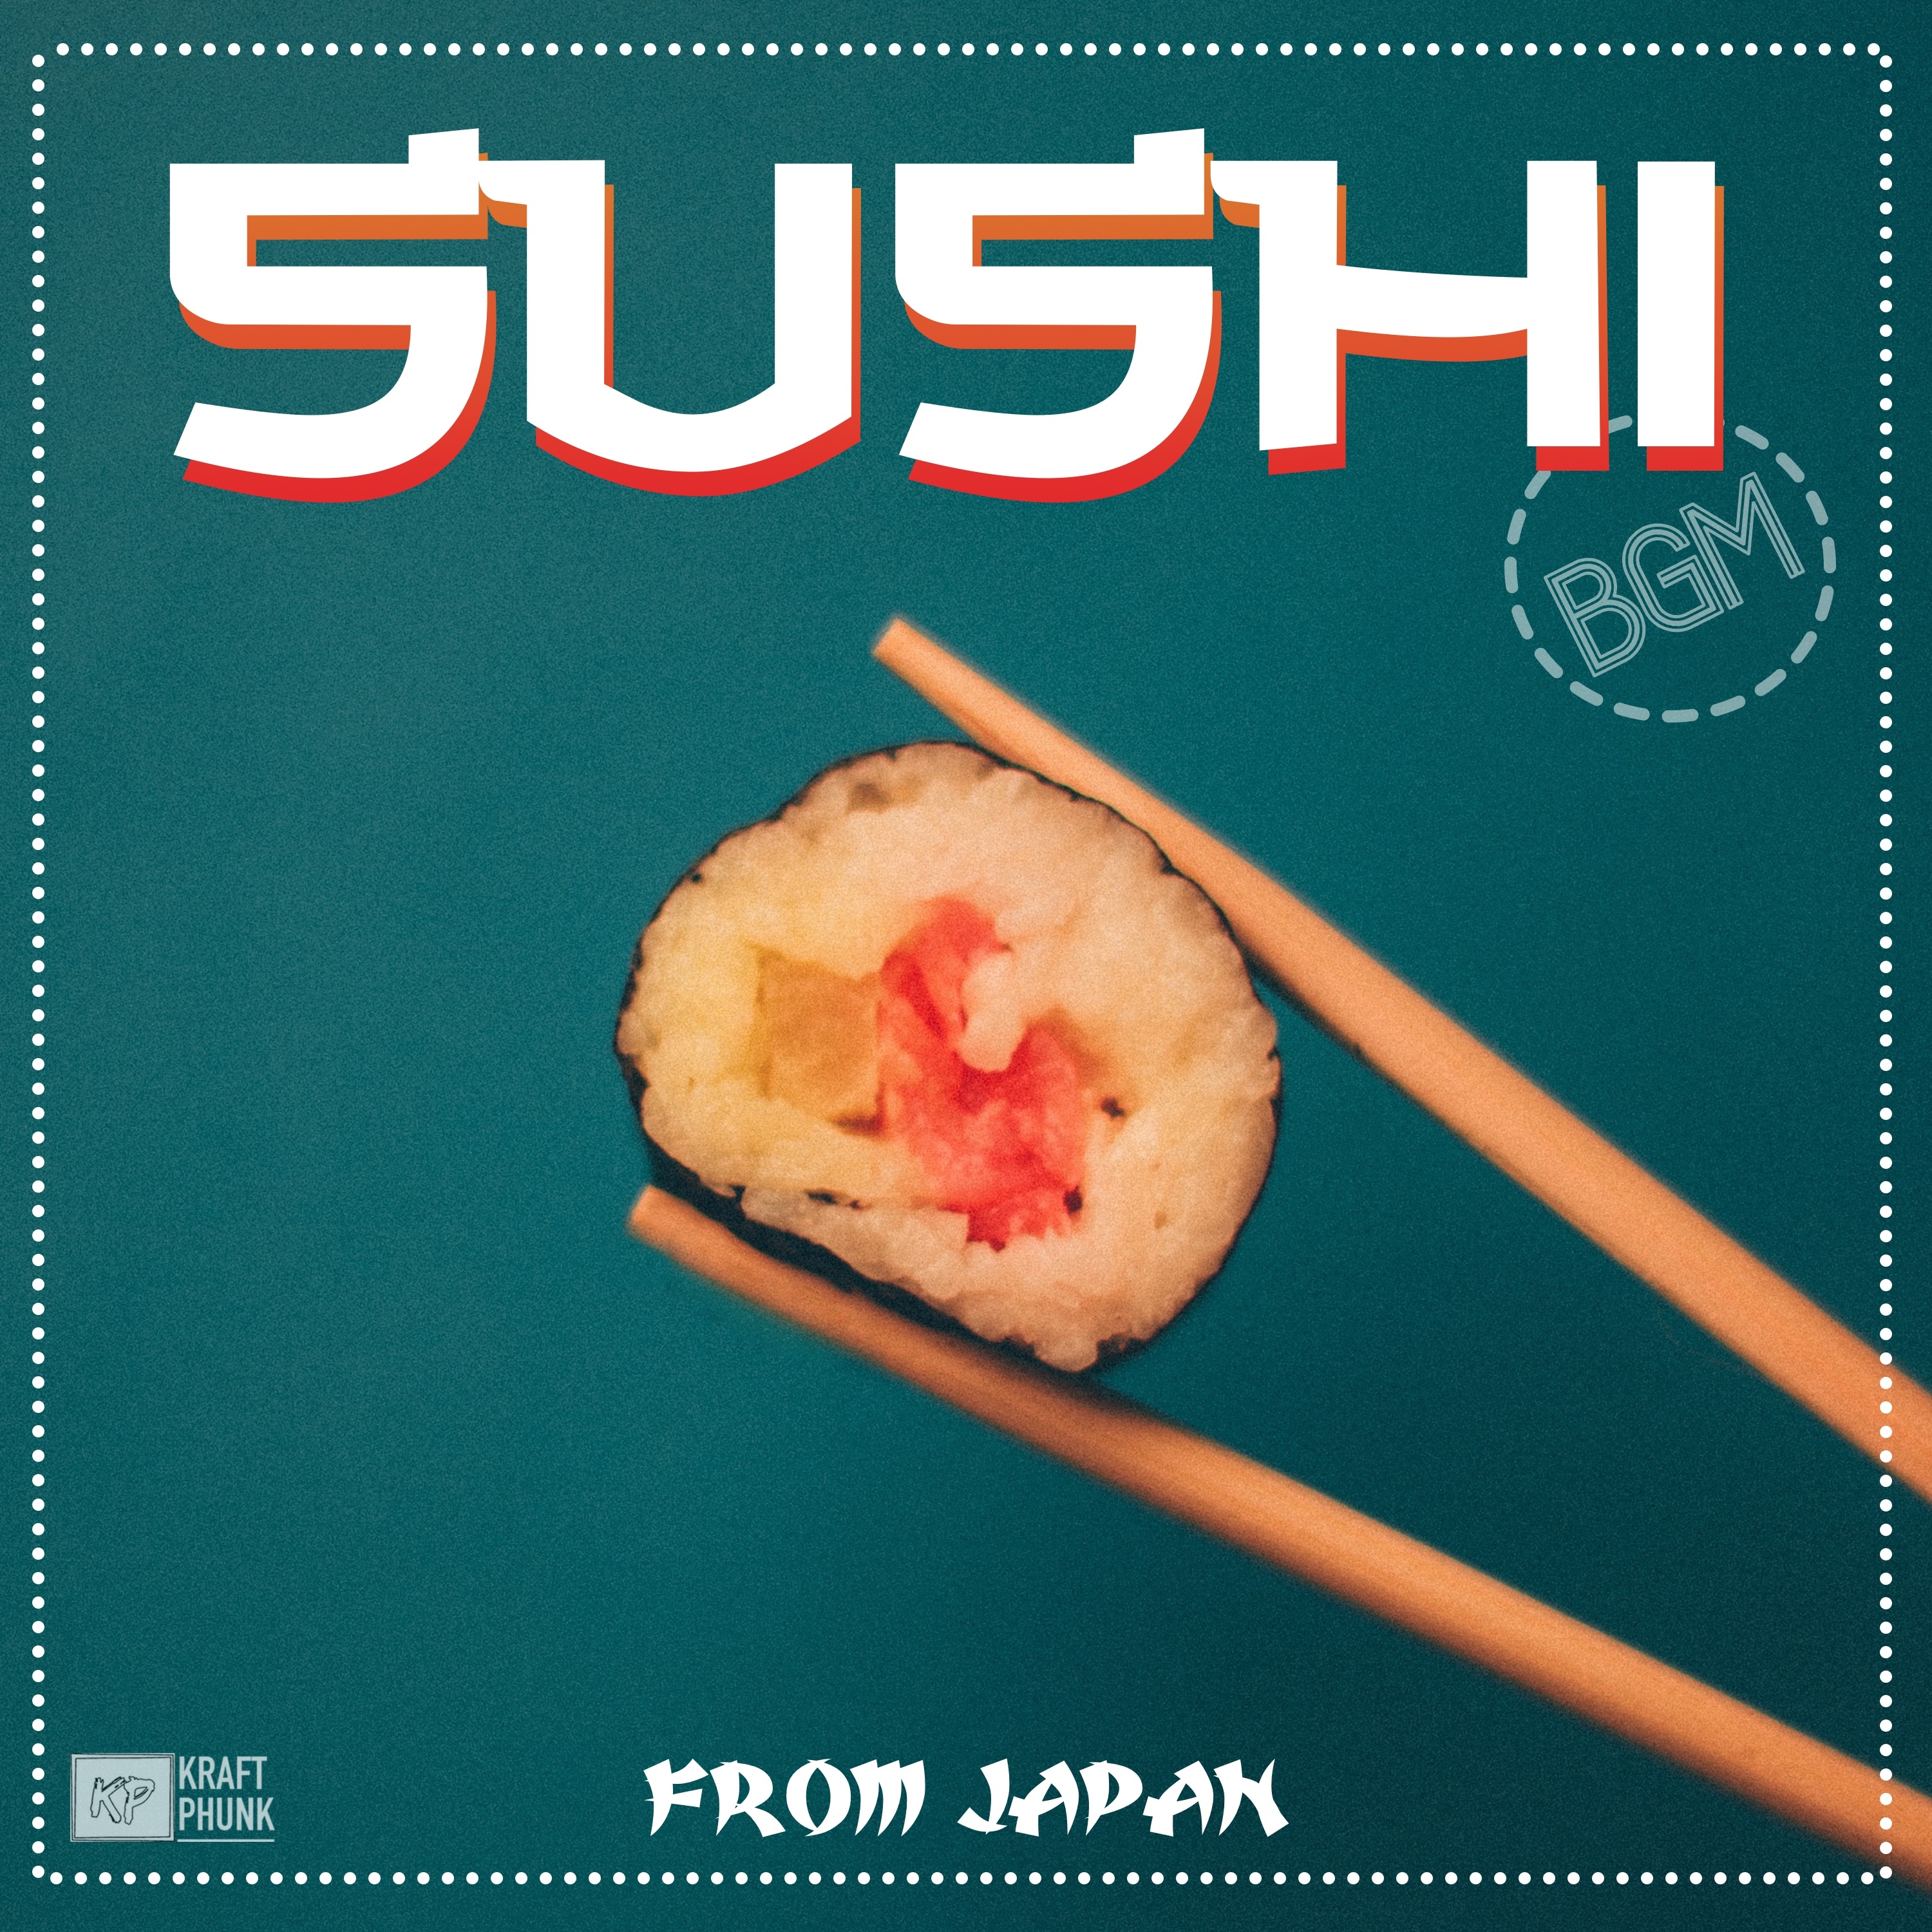 Sushi From Japan BGM - Electronic Music Selection for Fusion Restaurants